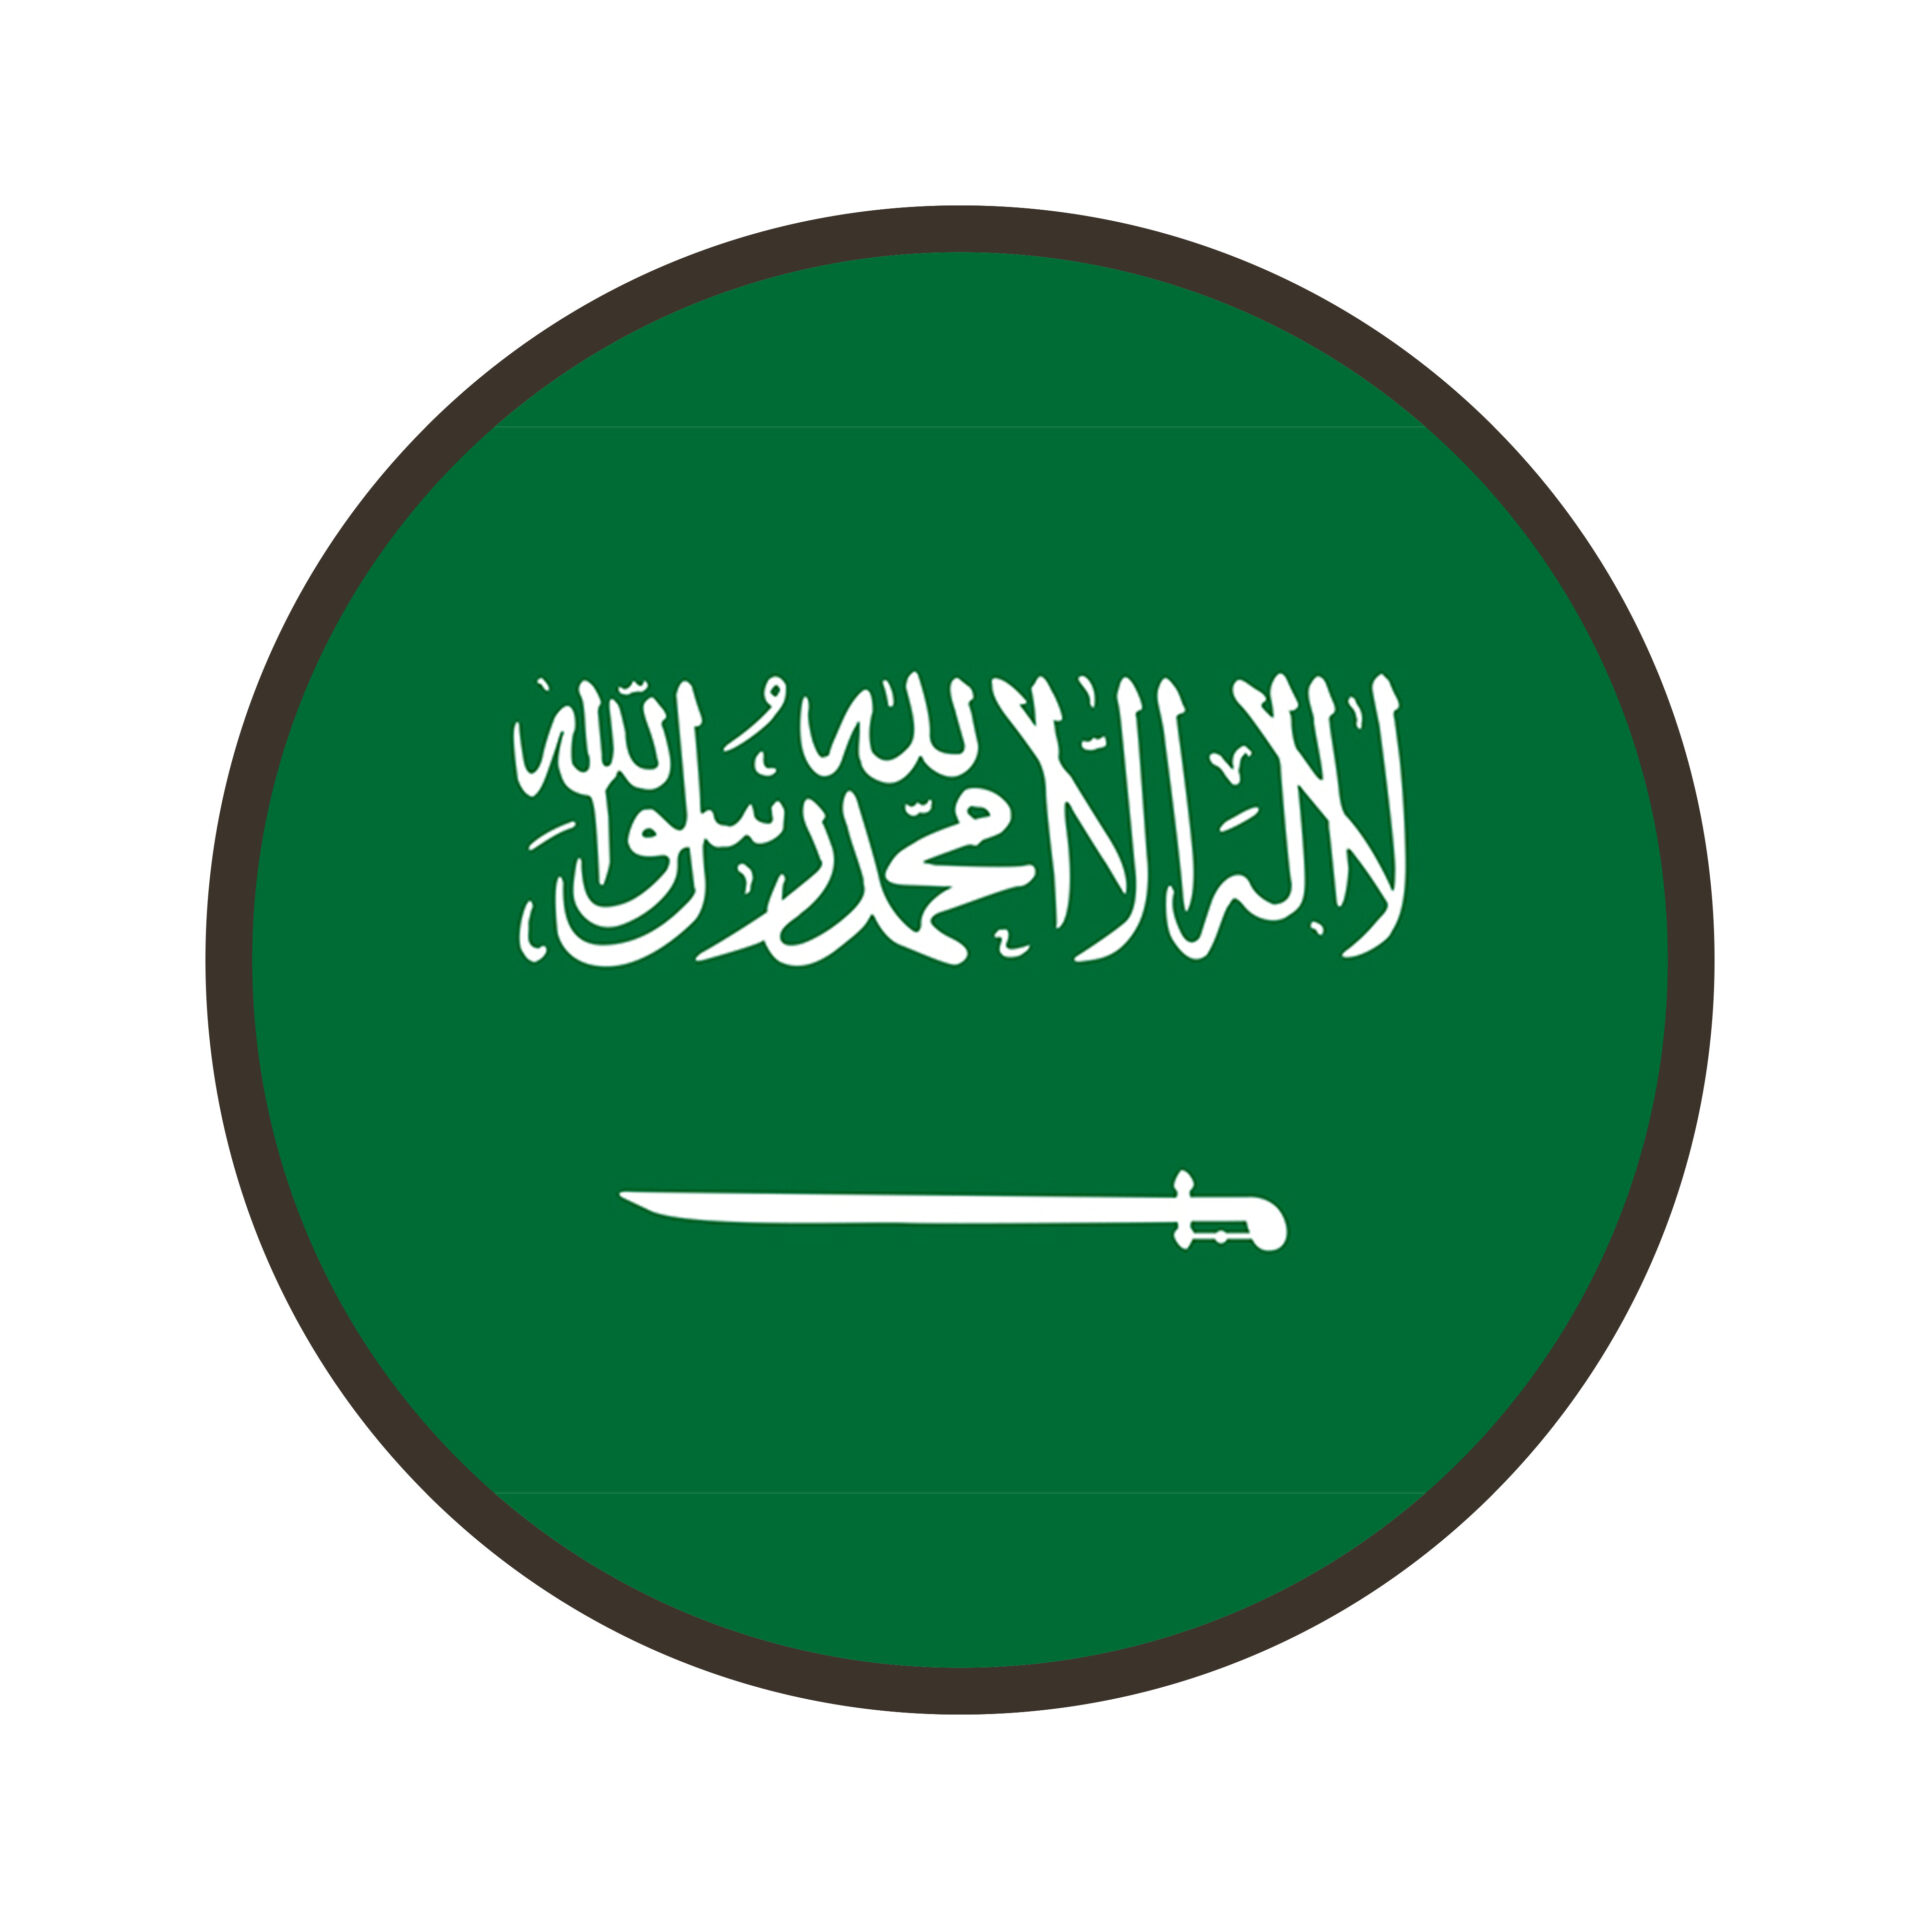 Saudi Arabia Archives - Solve Collectibles